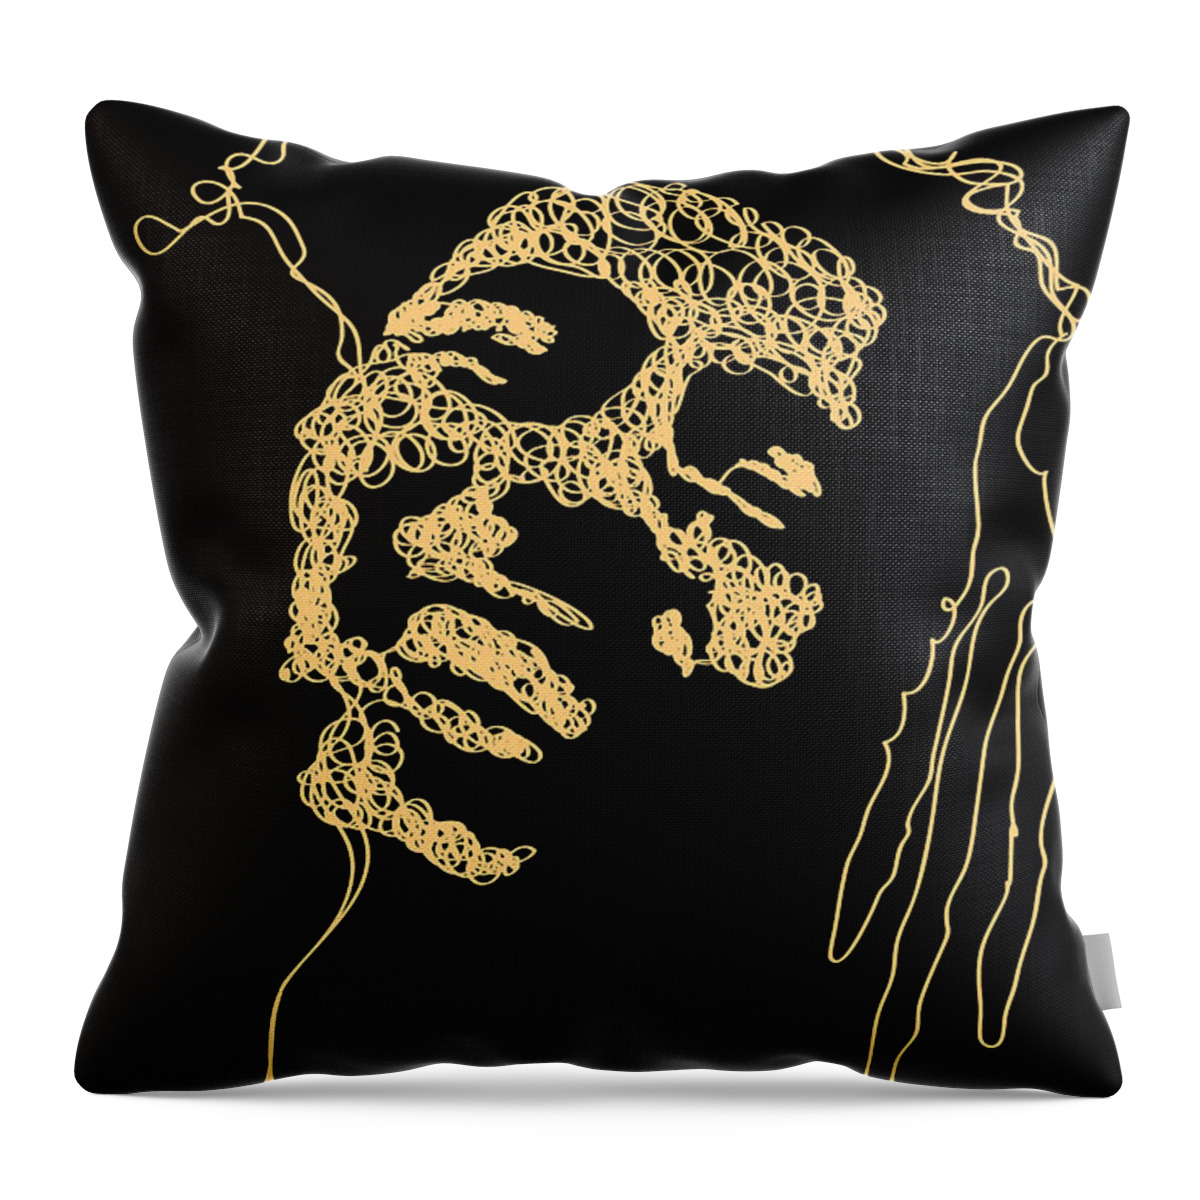 Art Throw Pillow featuring the painting Bob - one line drawing portrait by Vart. by Vart